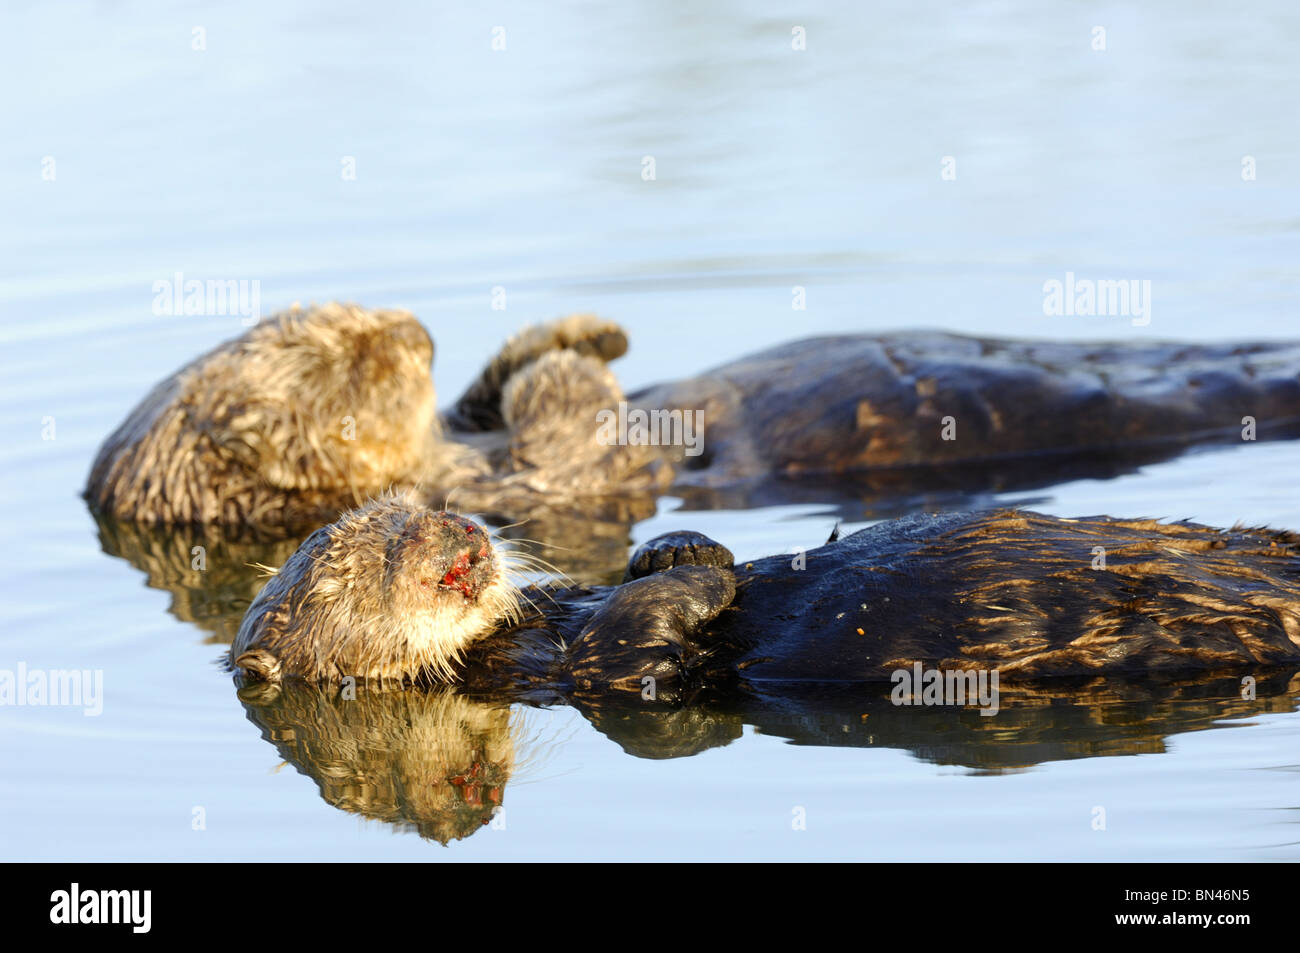 Stock photo of a breeding pair of California sea otters floating together on their backs.  The female's nose is bloody. Stock Photo